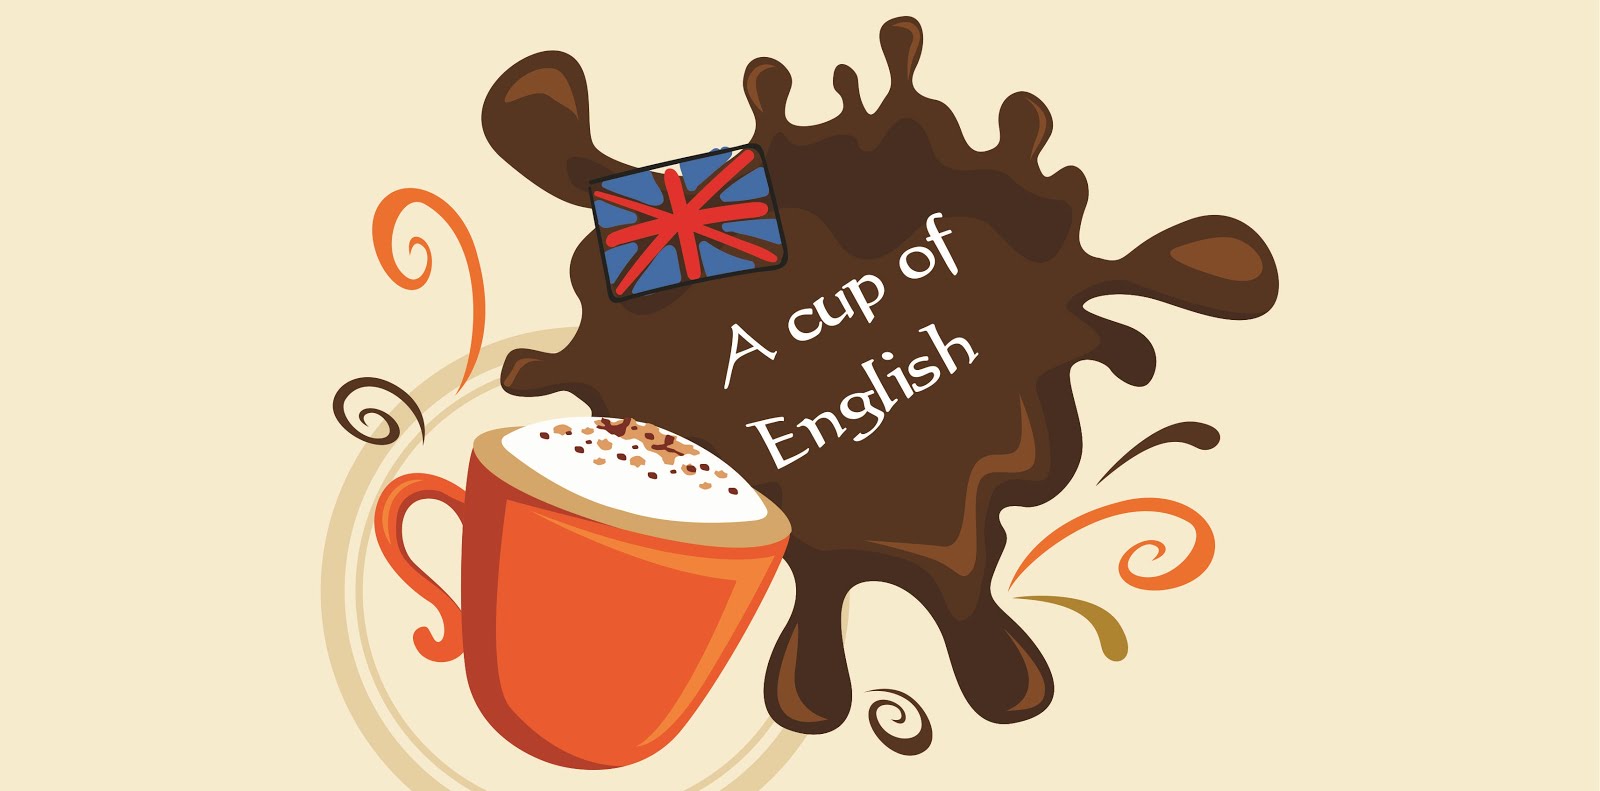 A cup of English